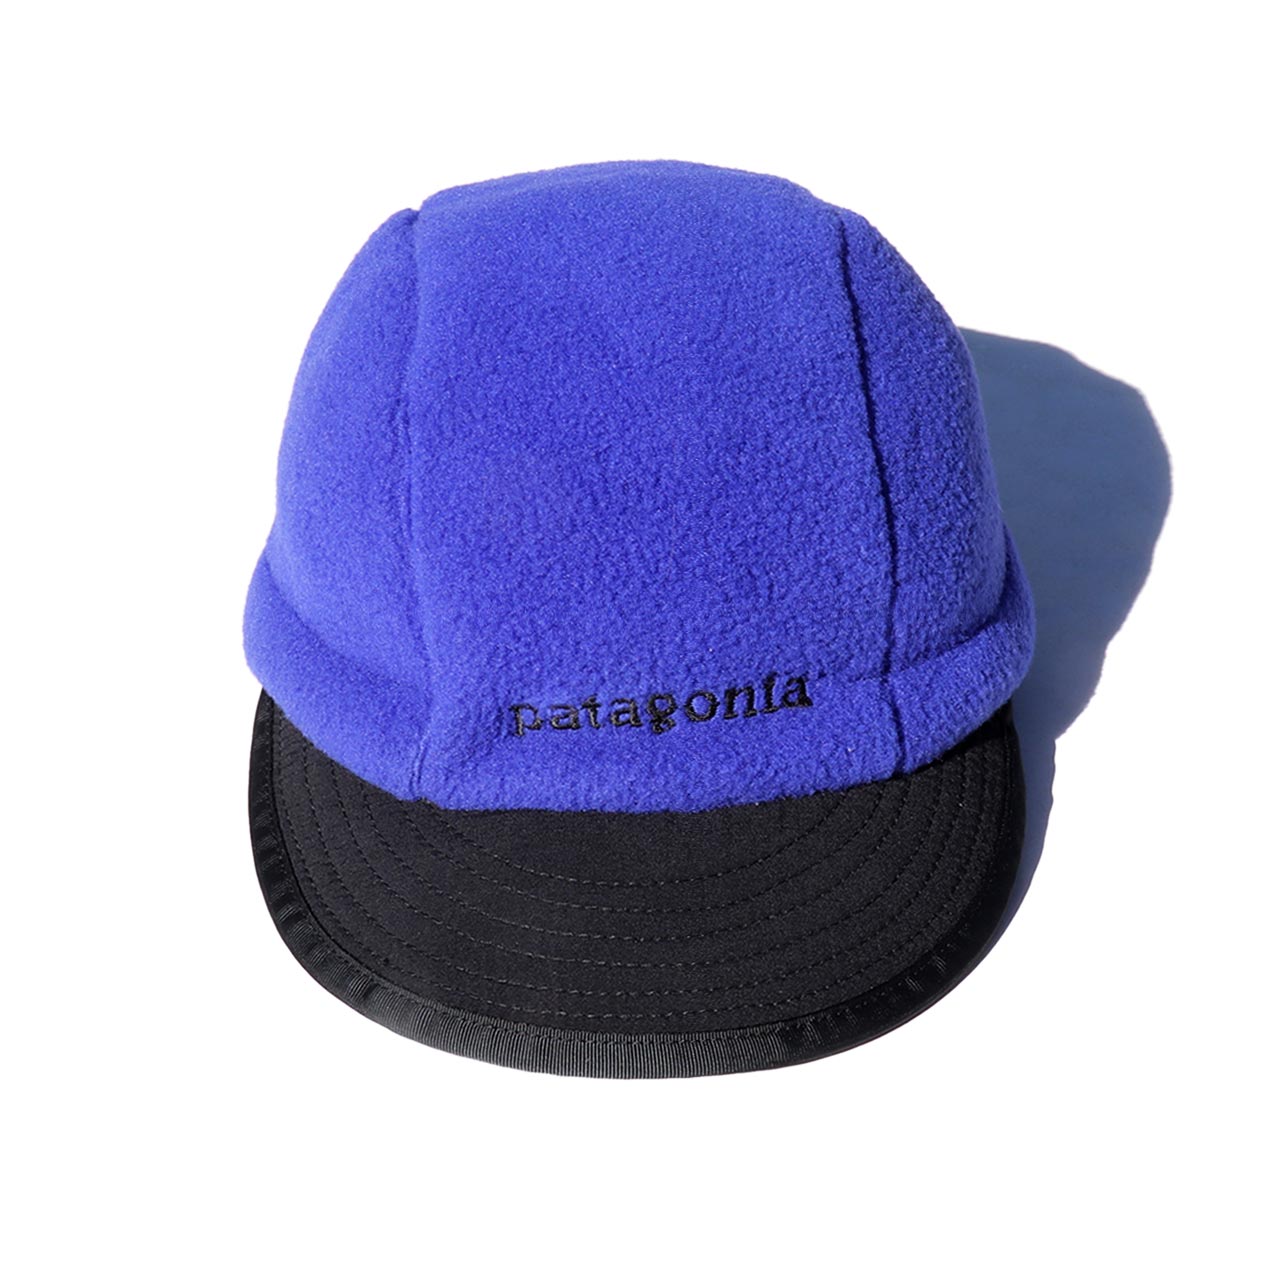 POST JUNK / '00 PATAGONIA Synchilla Duckbill Cap Made In U.S.A. [M]